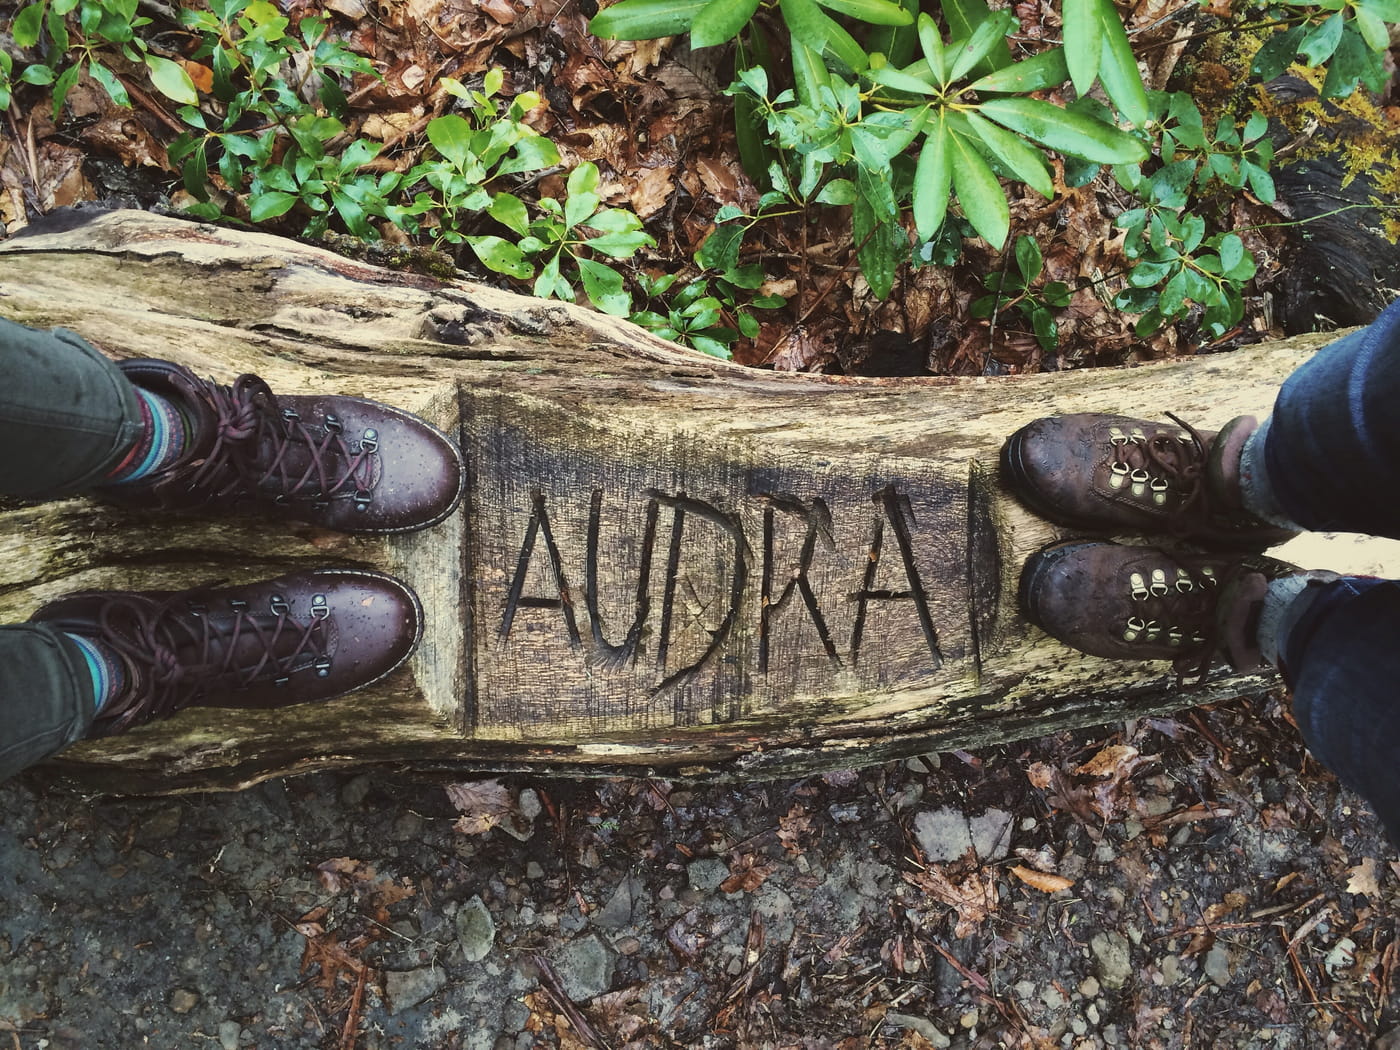 Two people in leather boots standing on a carved log displaying the word Audra.